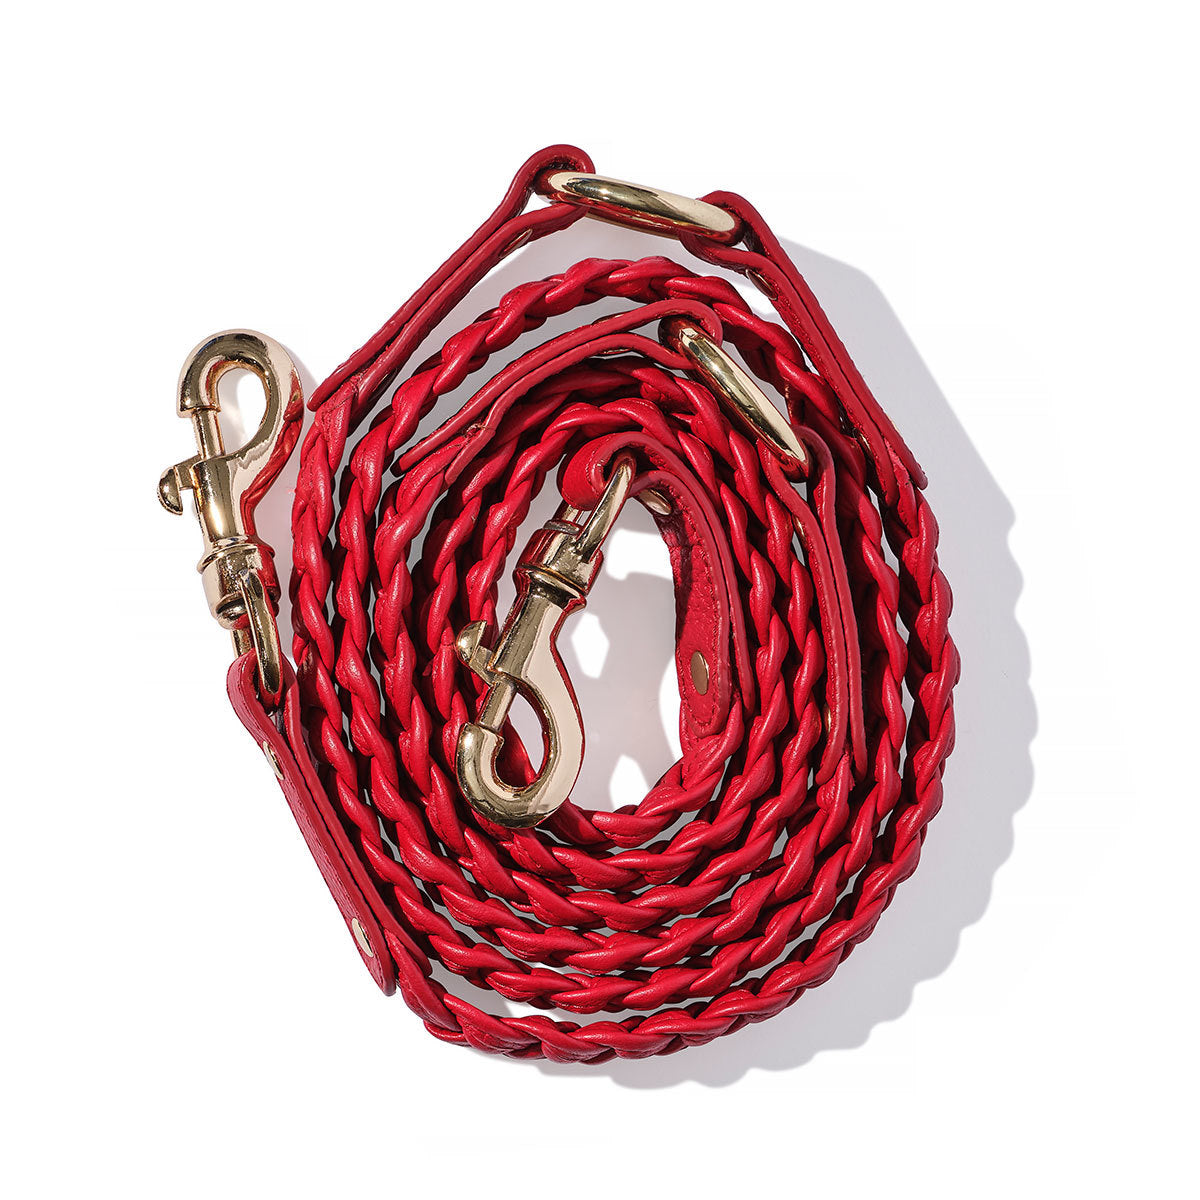 Woven Dog leads